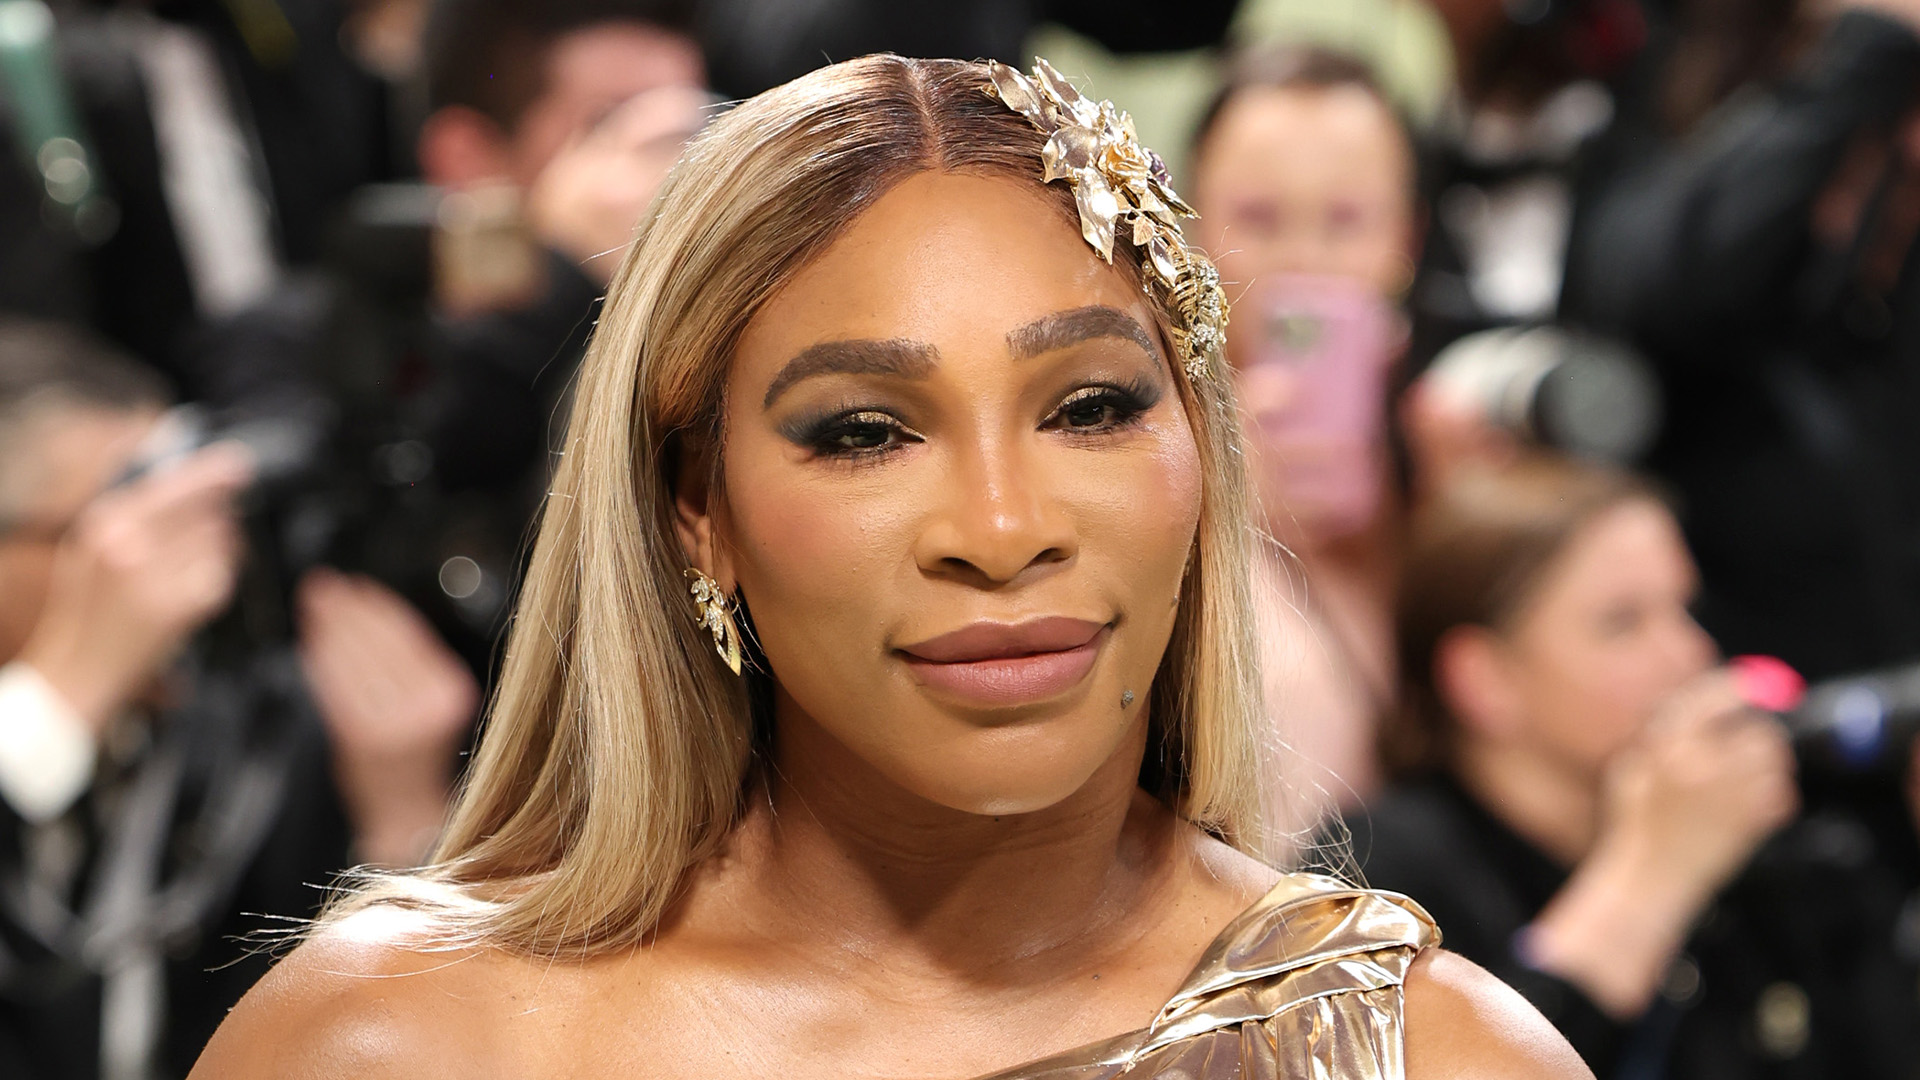 Serena Williams Shines in a Golden Balenciaga Gown at the Met Gala